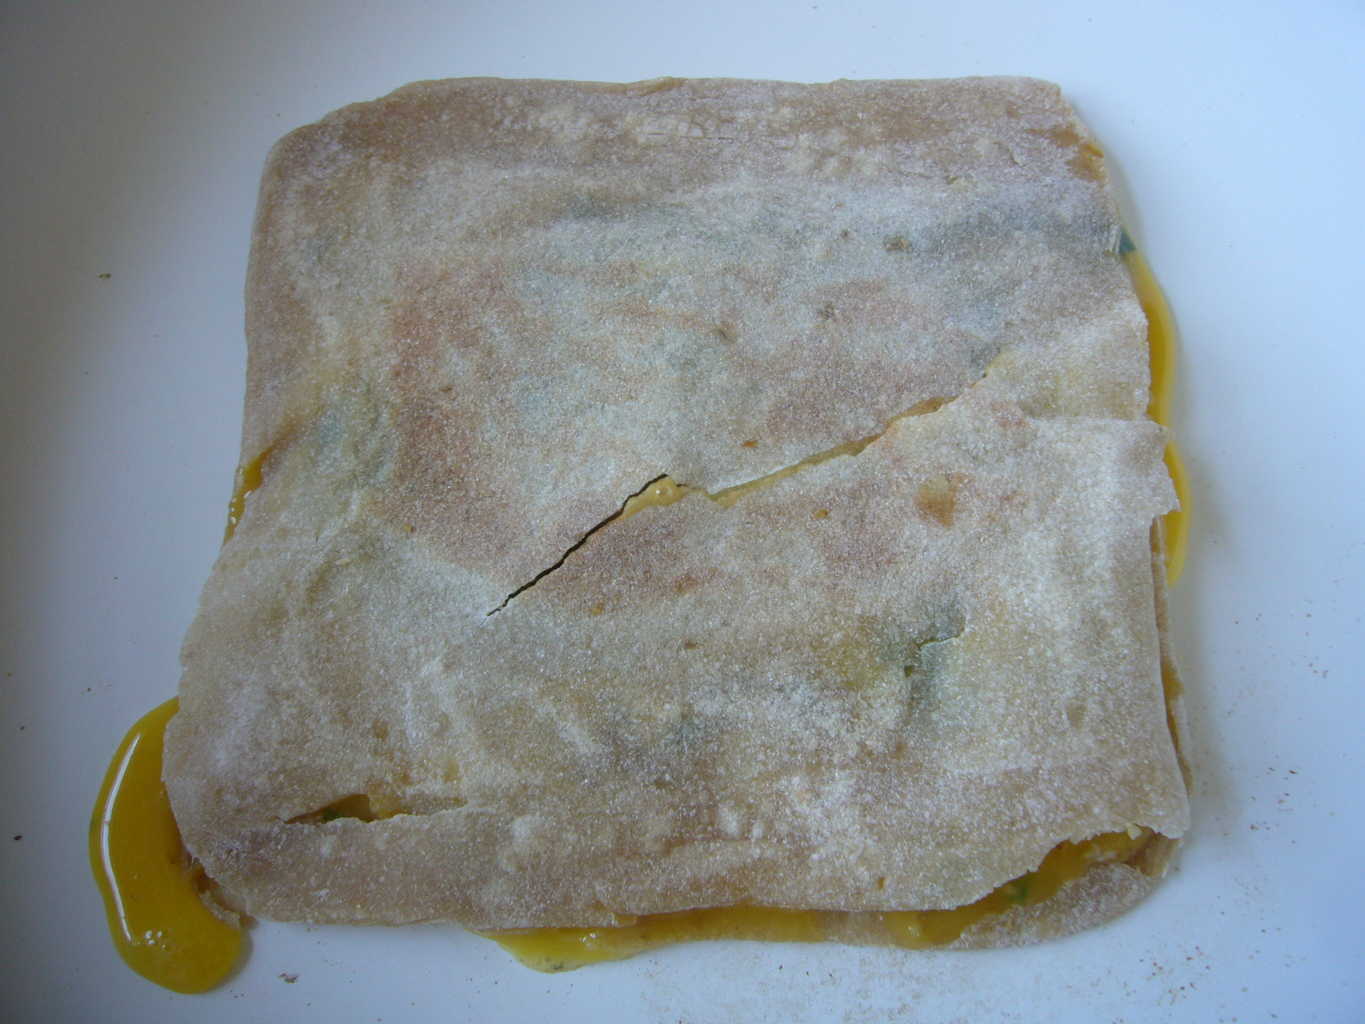 Fold over the top layer of the flatbread to make egg paratha.